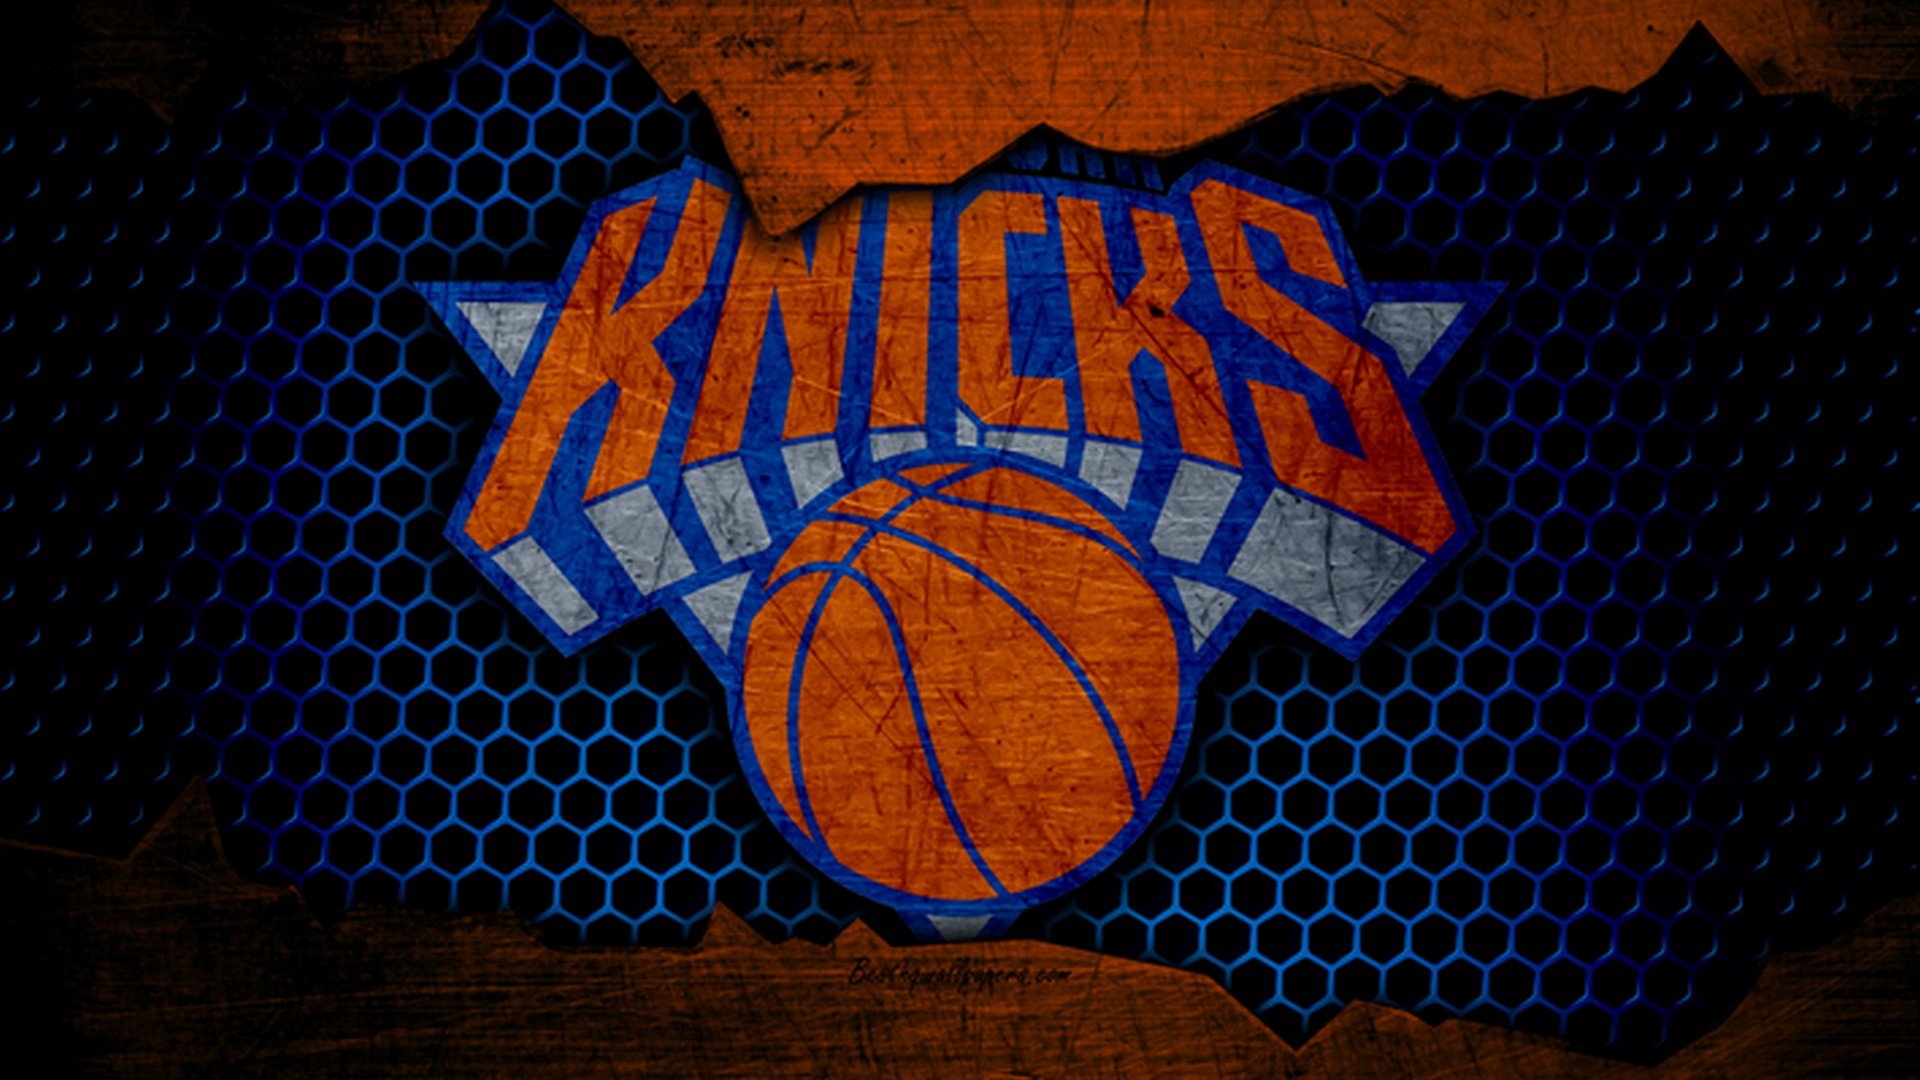 Wallpaper Desktop New York Knicks HD with image dimensions 1920x1080 pixel. You can make this wallpaper for your Desktop Computer Backgrounds, Windows or Mac Screensavers, iPhone Lock screen, Tablet or Android and another Mobile Phone device